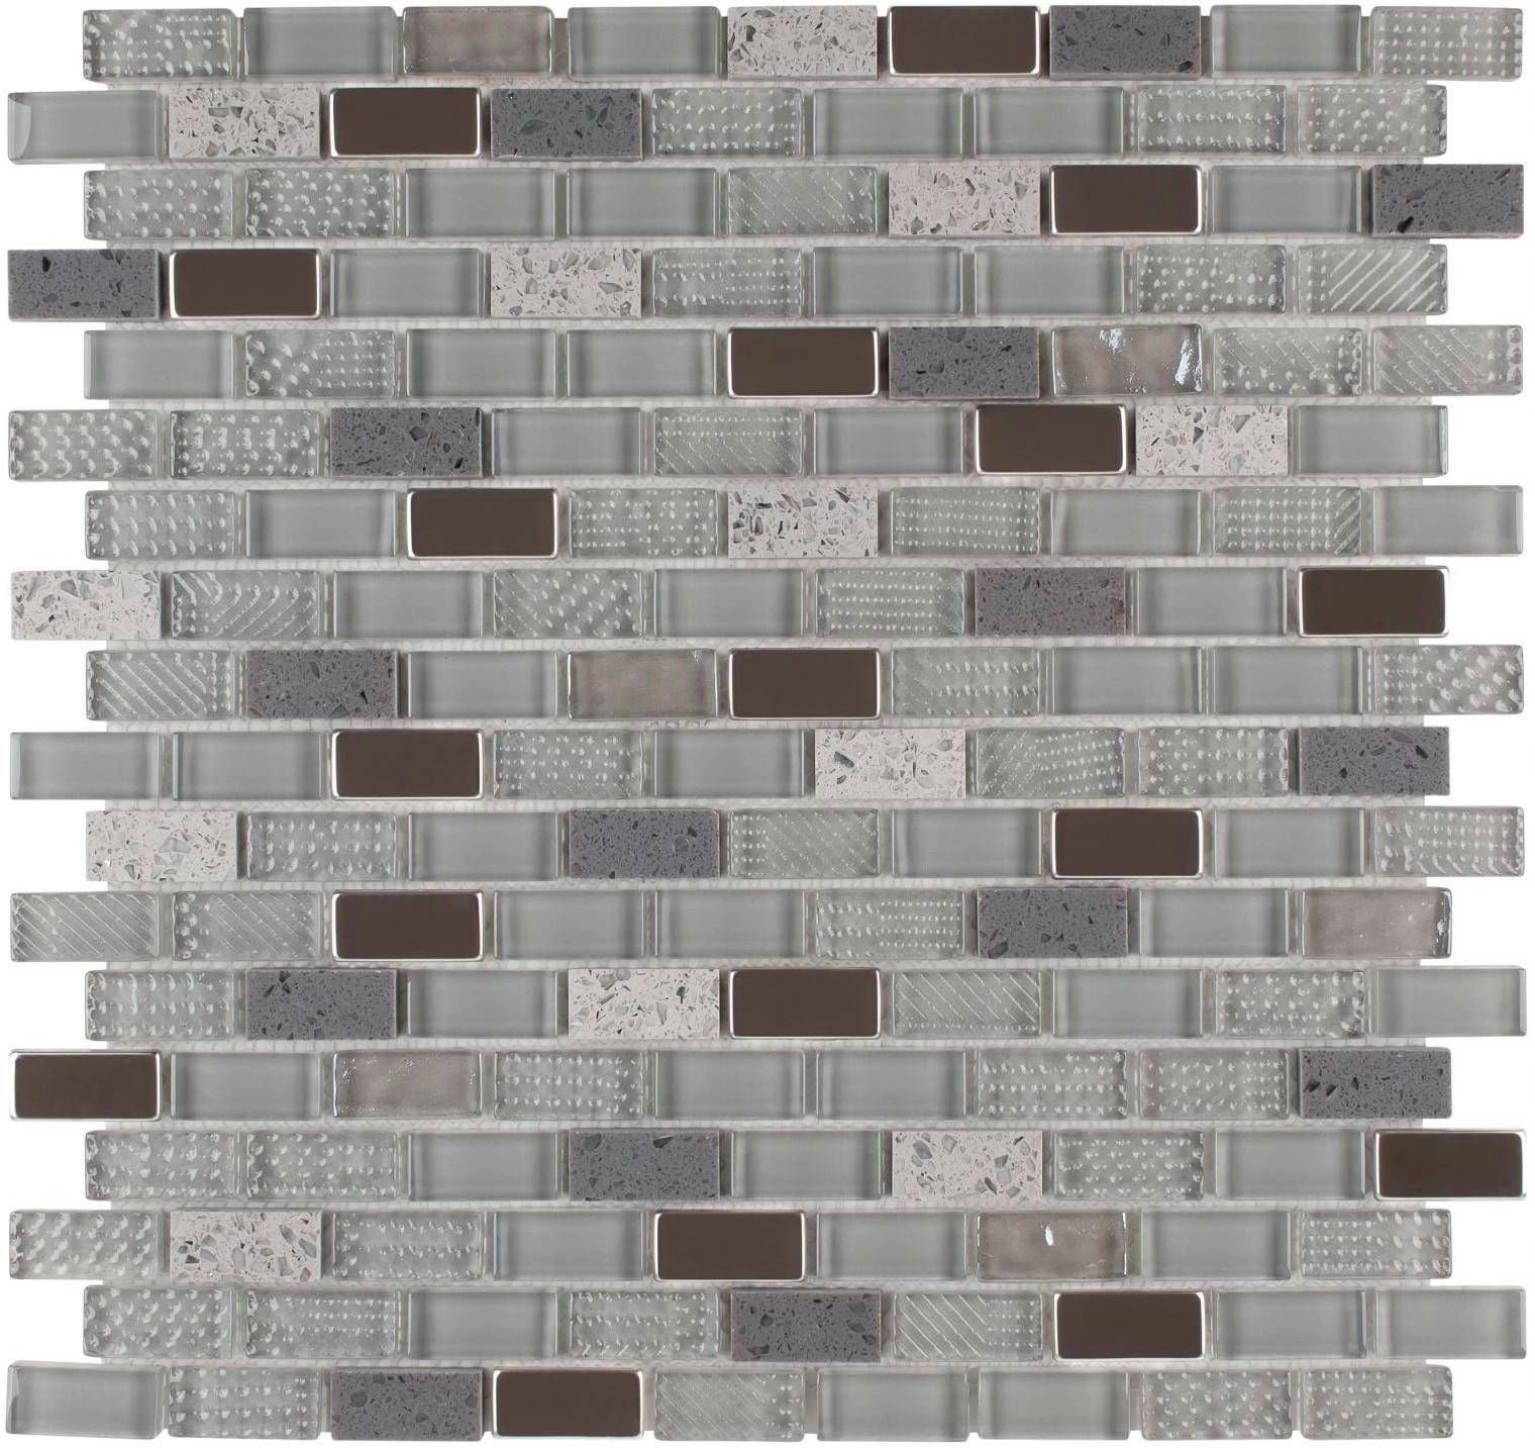 CL503 | Stones & More | Finest selection of Mosaics, Glass, Tile and Stone